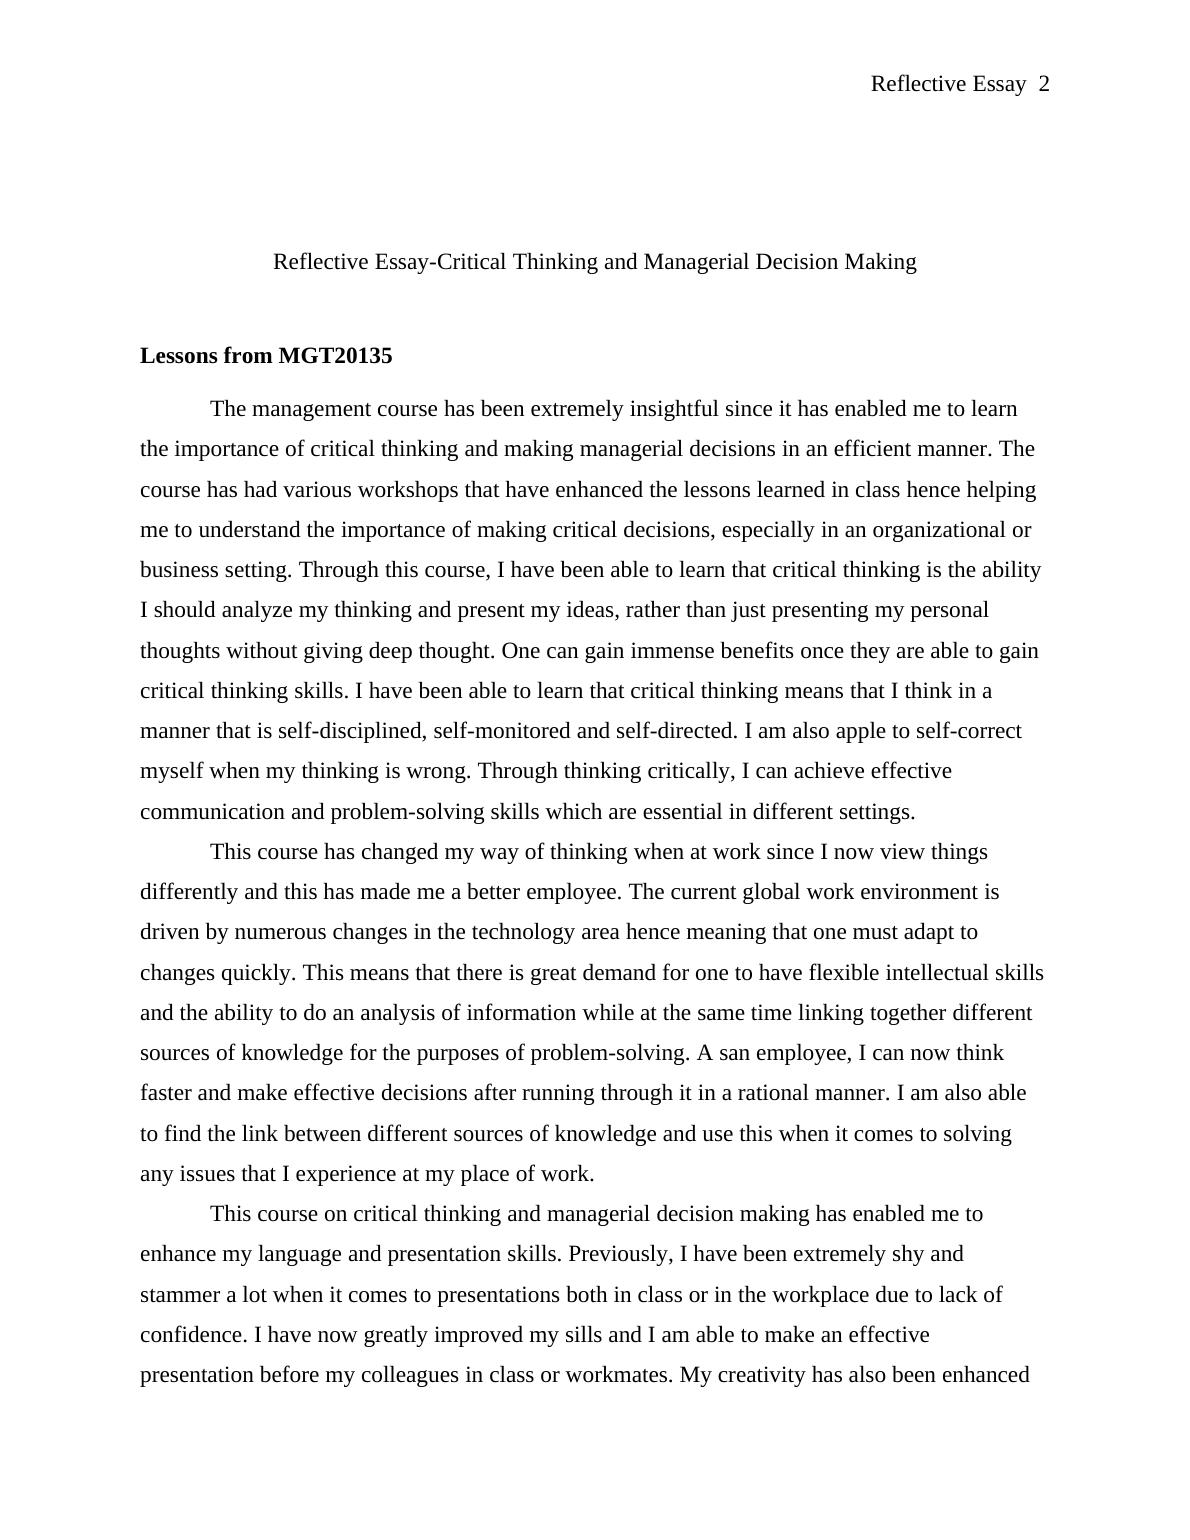 reflective essay on decision making